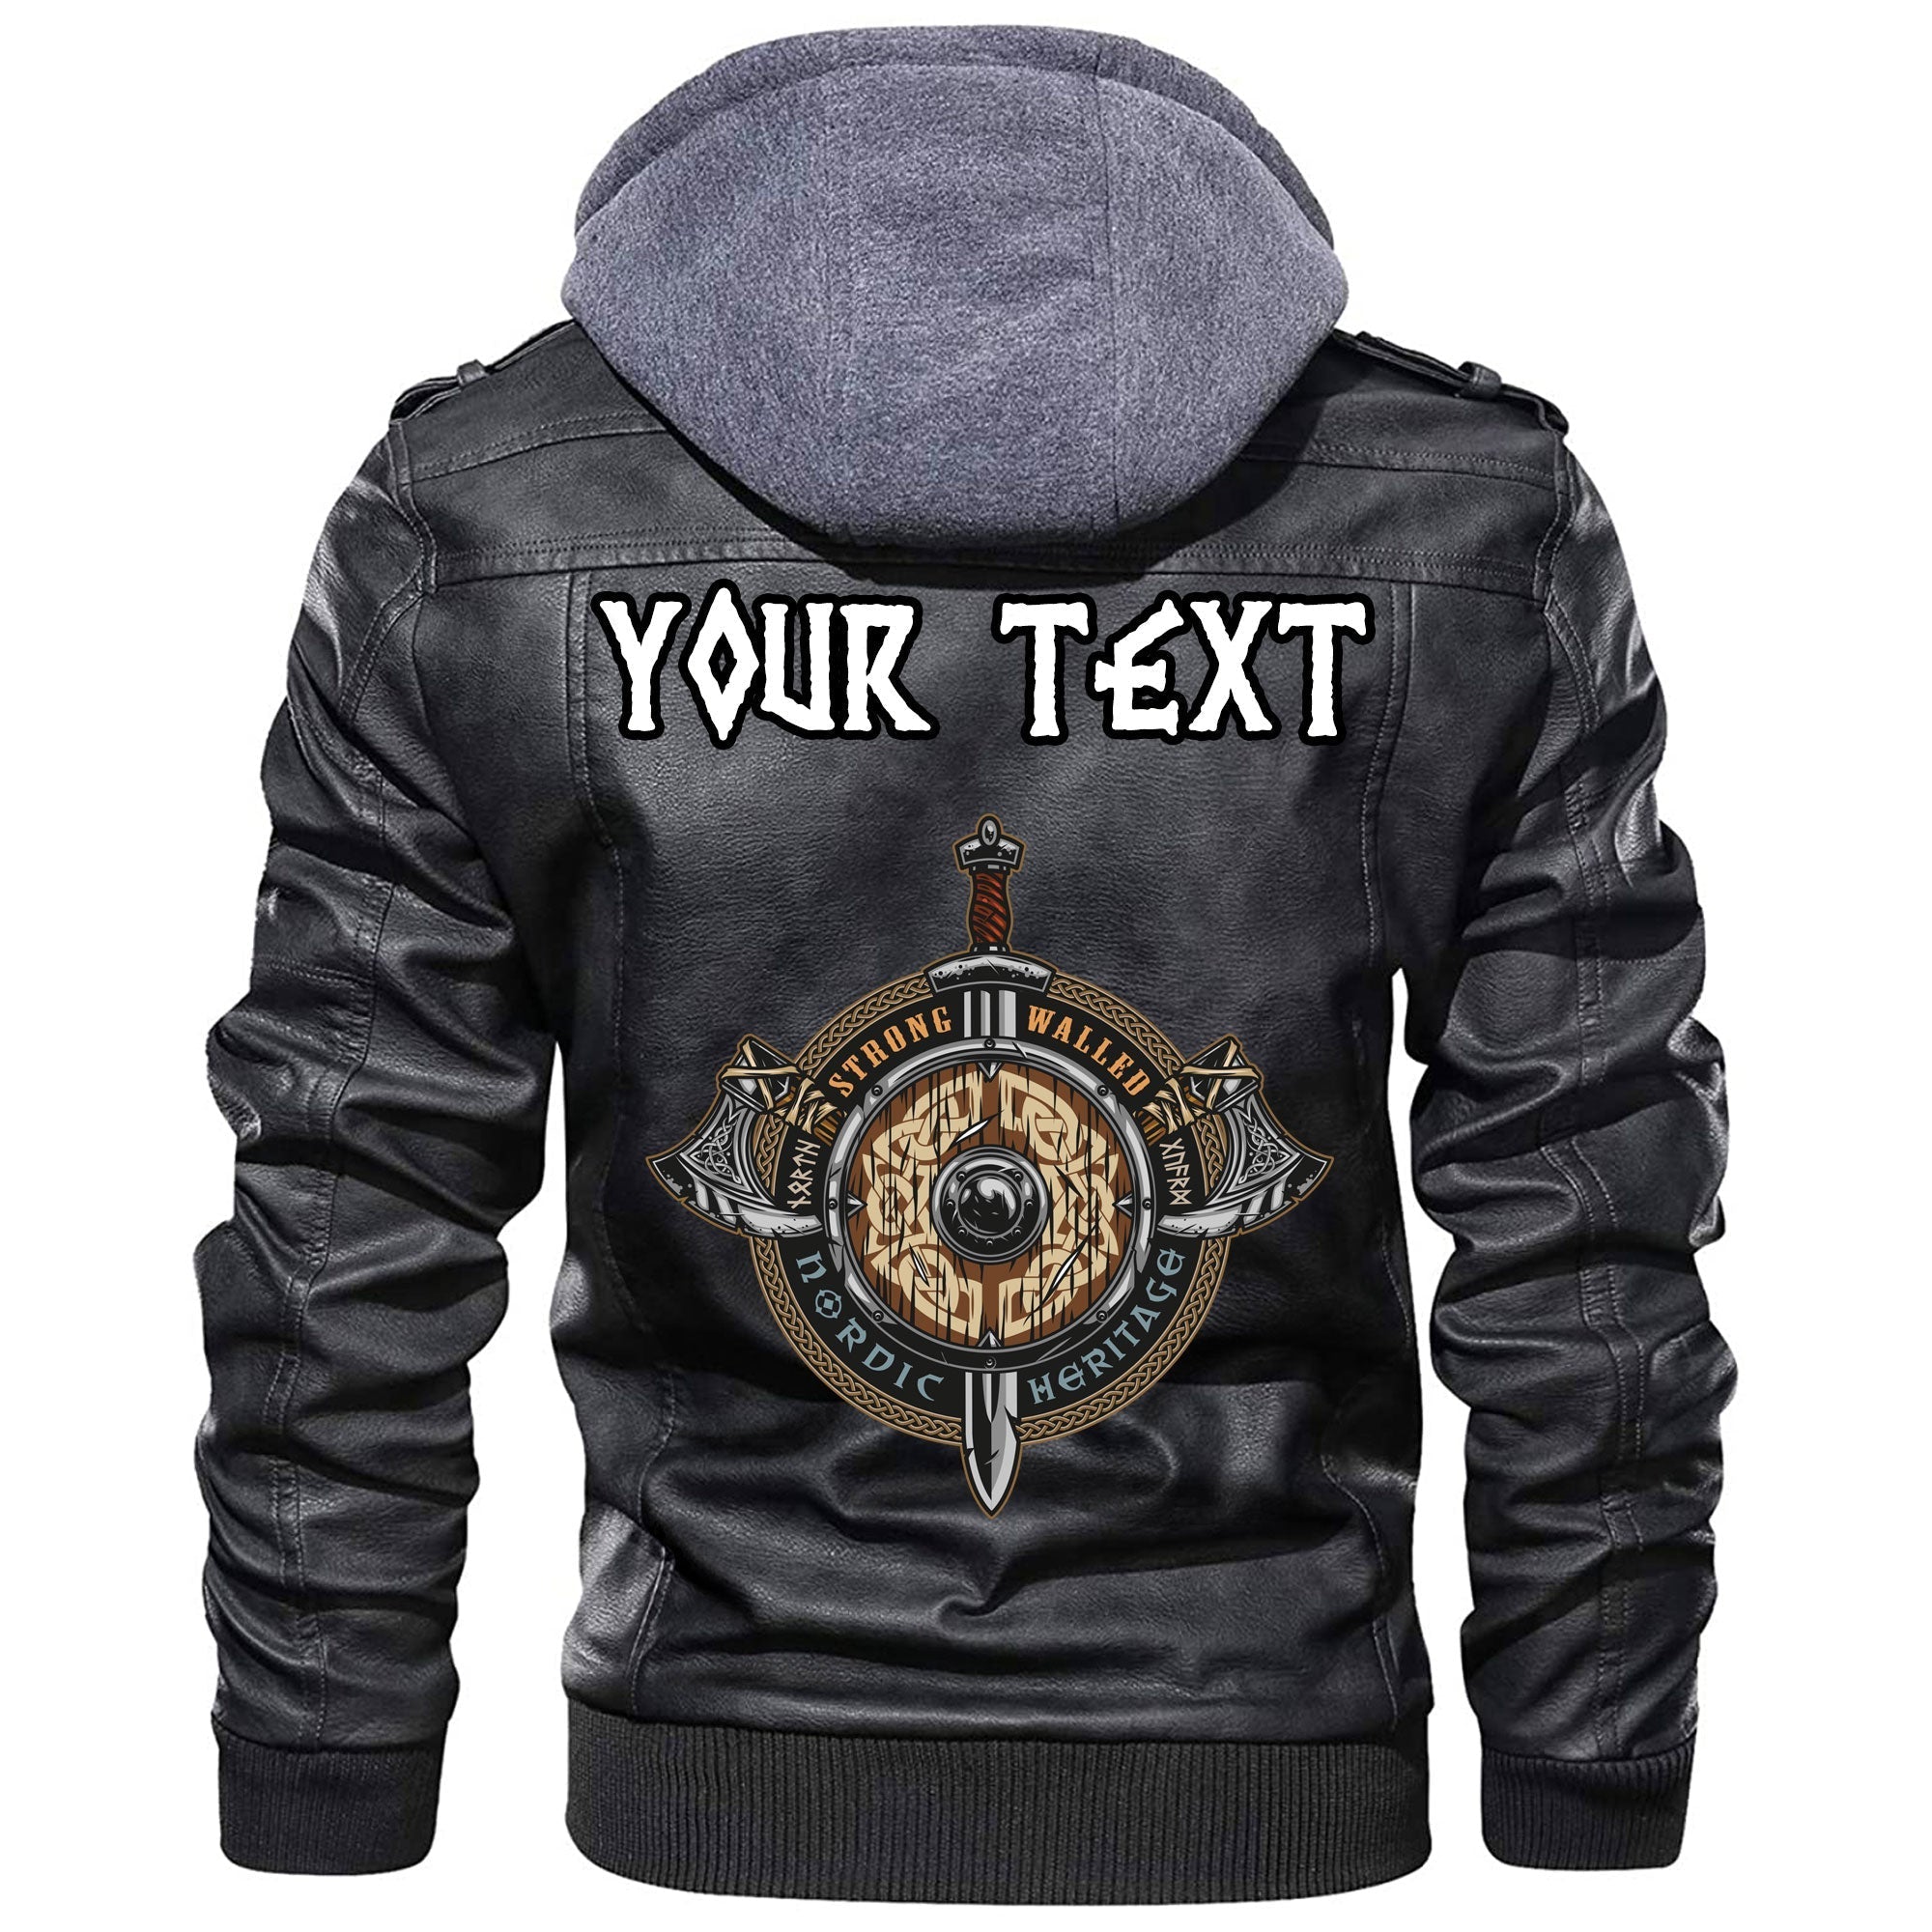 custom-wonder-print-shop-weapon-colorful-label-in-vintage-style-with-wooden-shield-leather-jacket